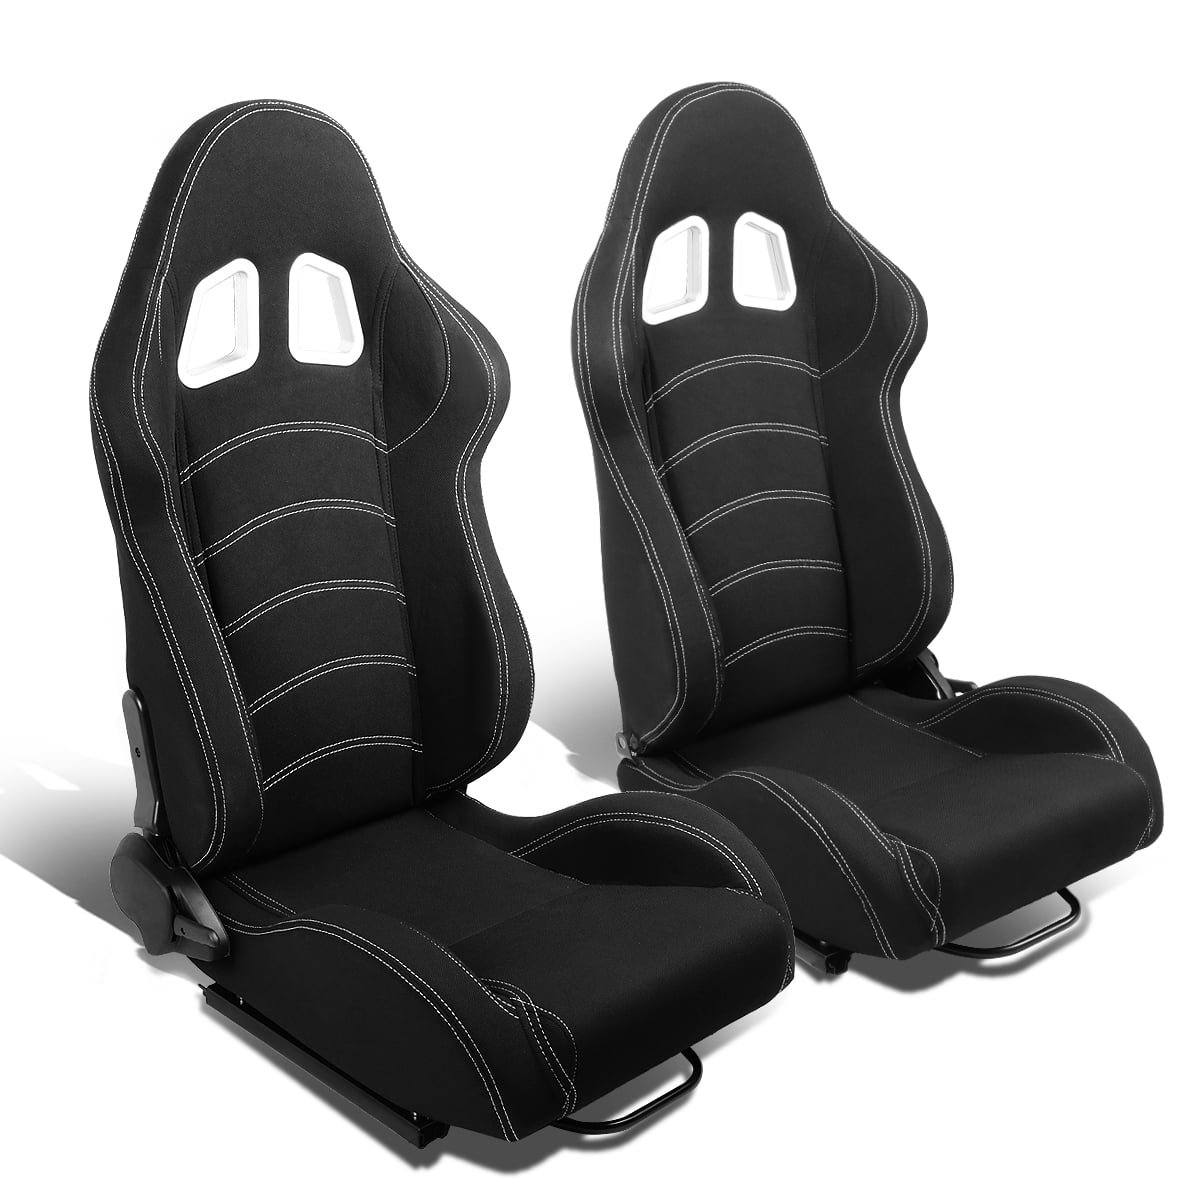 Adjustable Silder Leather&Black Stitch Pair of Type-R Reclinable Racing Seat 